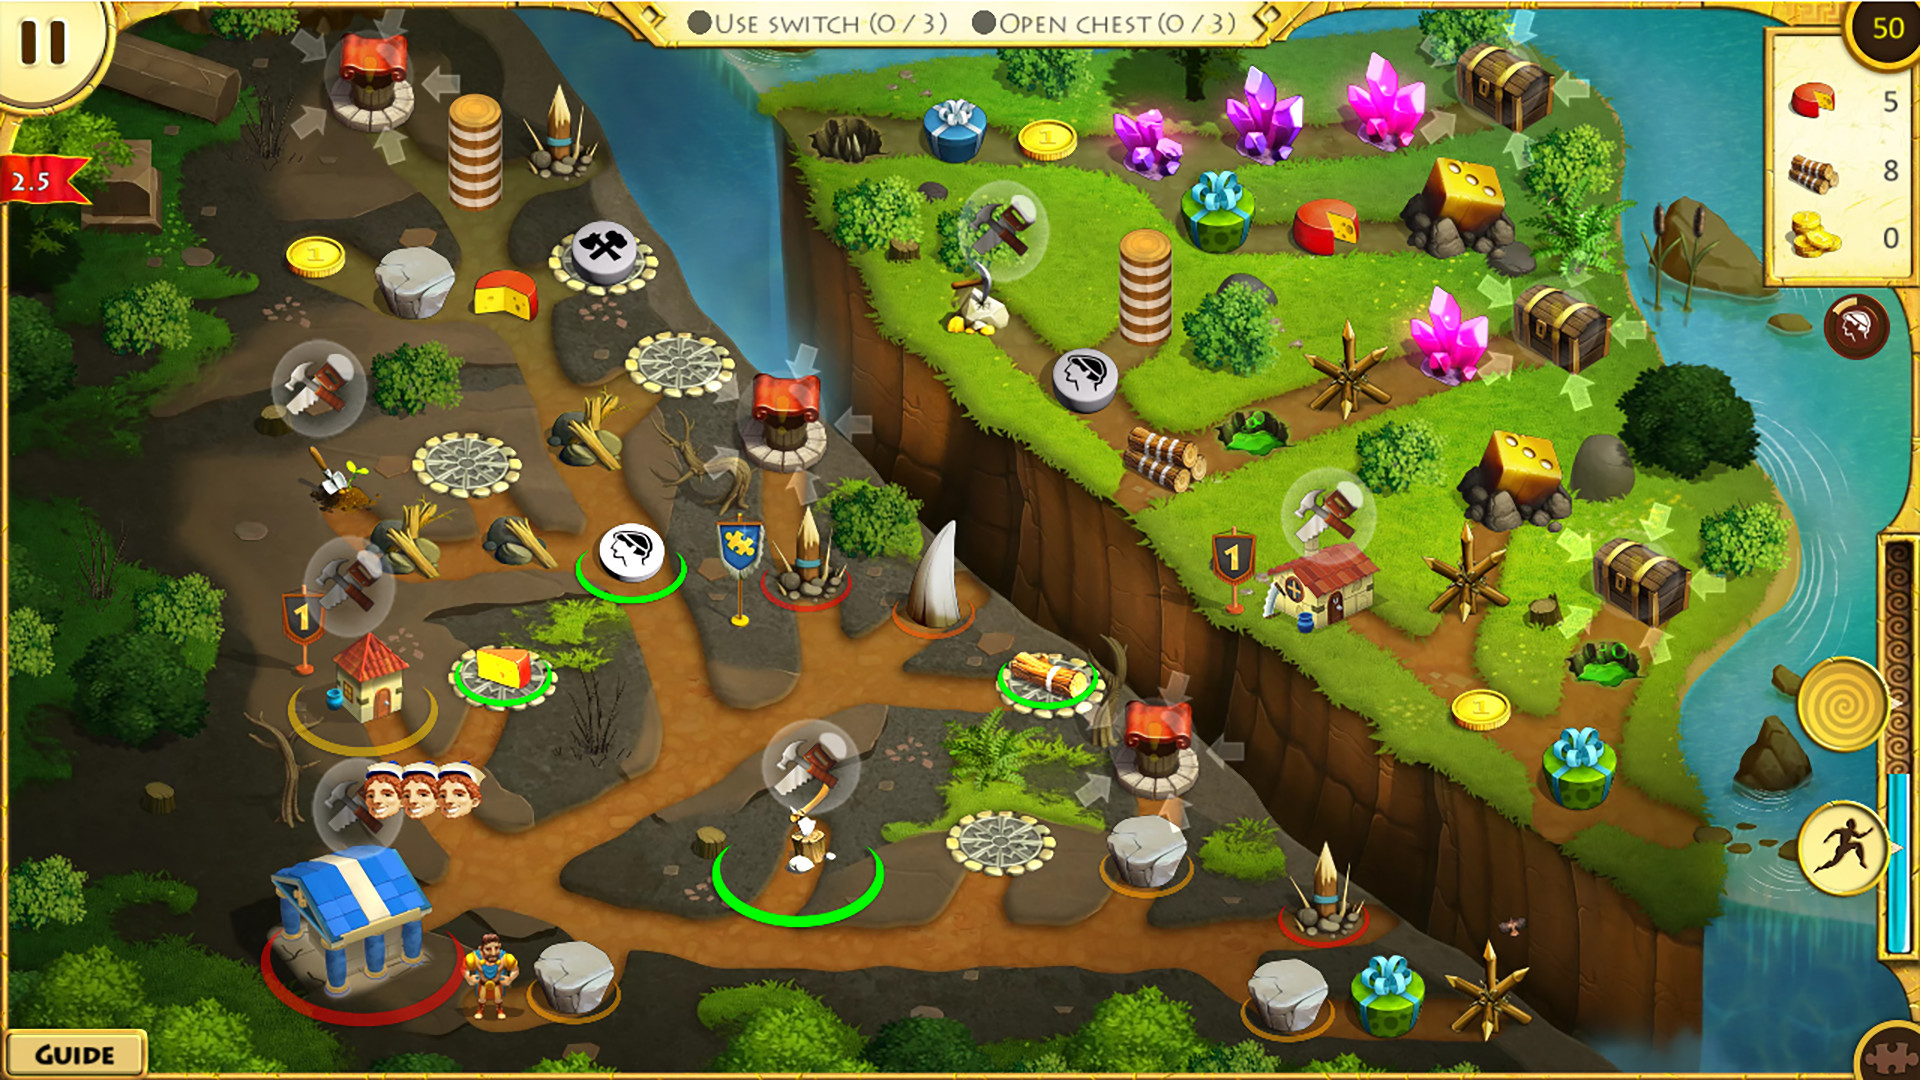 12 Labours of Hercules XI: Painted Adventure Free Download